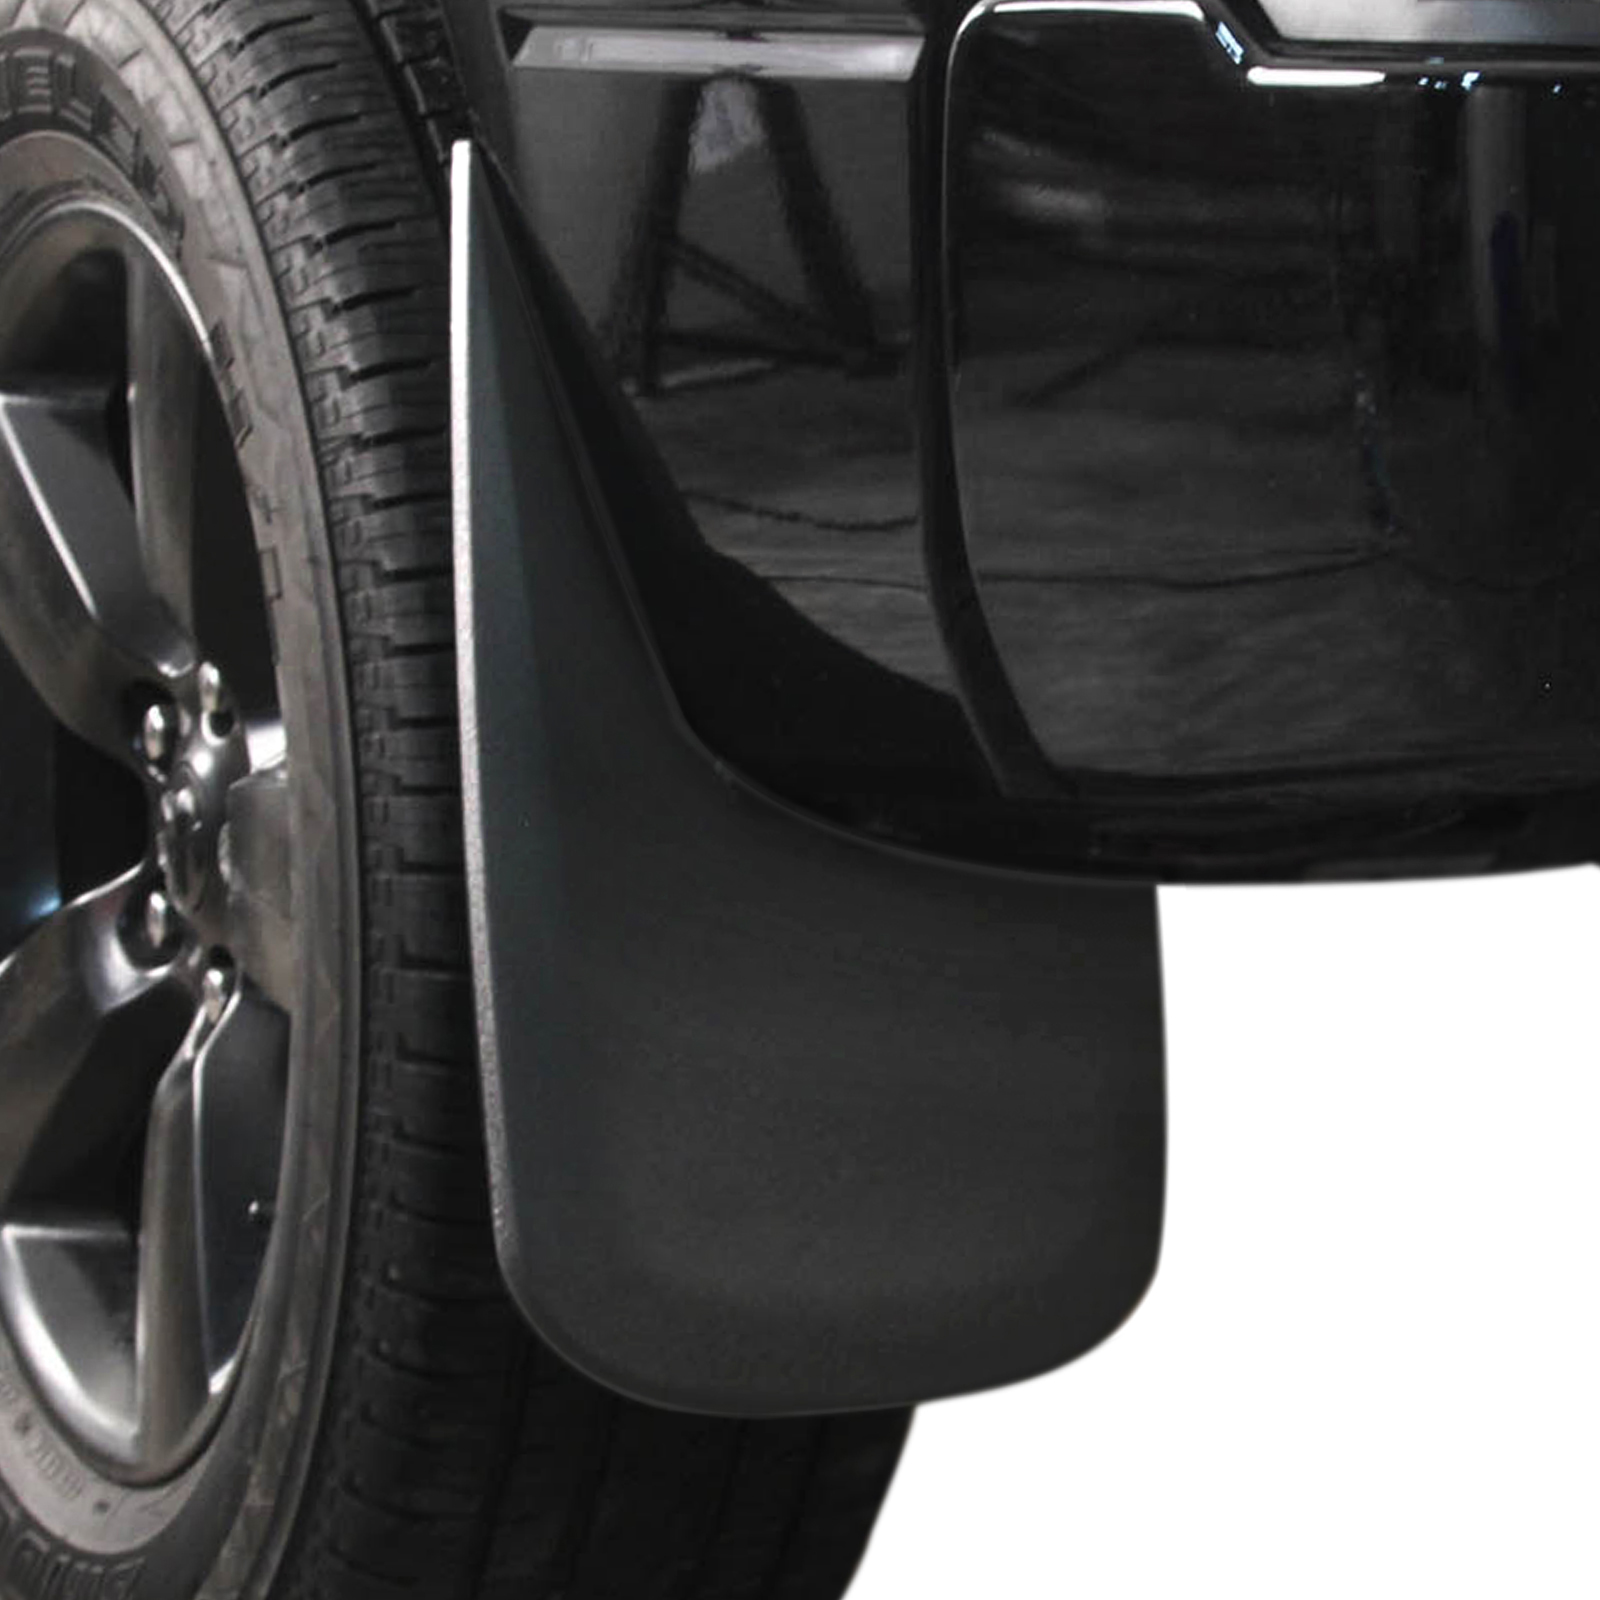 Premium Mud Flaps Splash Guards Compatible with Dodge Ram (1500 2009-2018, 1500 Classic 2019, 2500 3500 2010-2018) Molded Front Rear 4 Piece Set for Trucks Without Fender Flares 82211228, 82212287AC - image 3 of 8